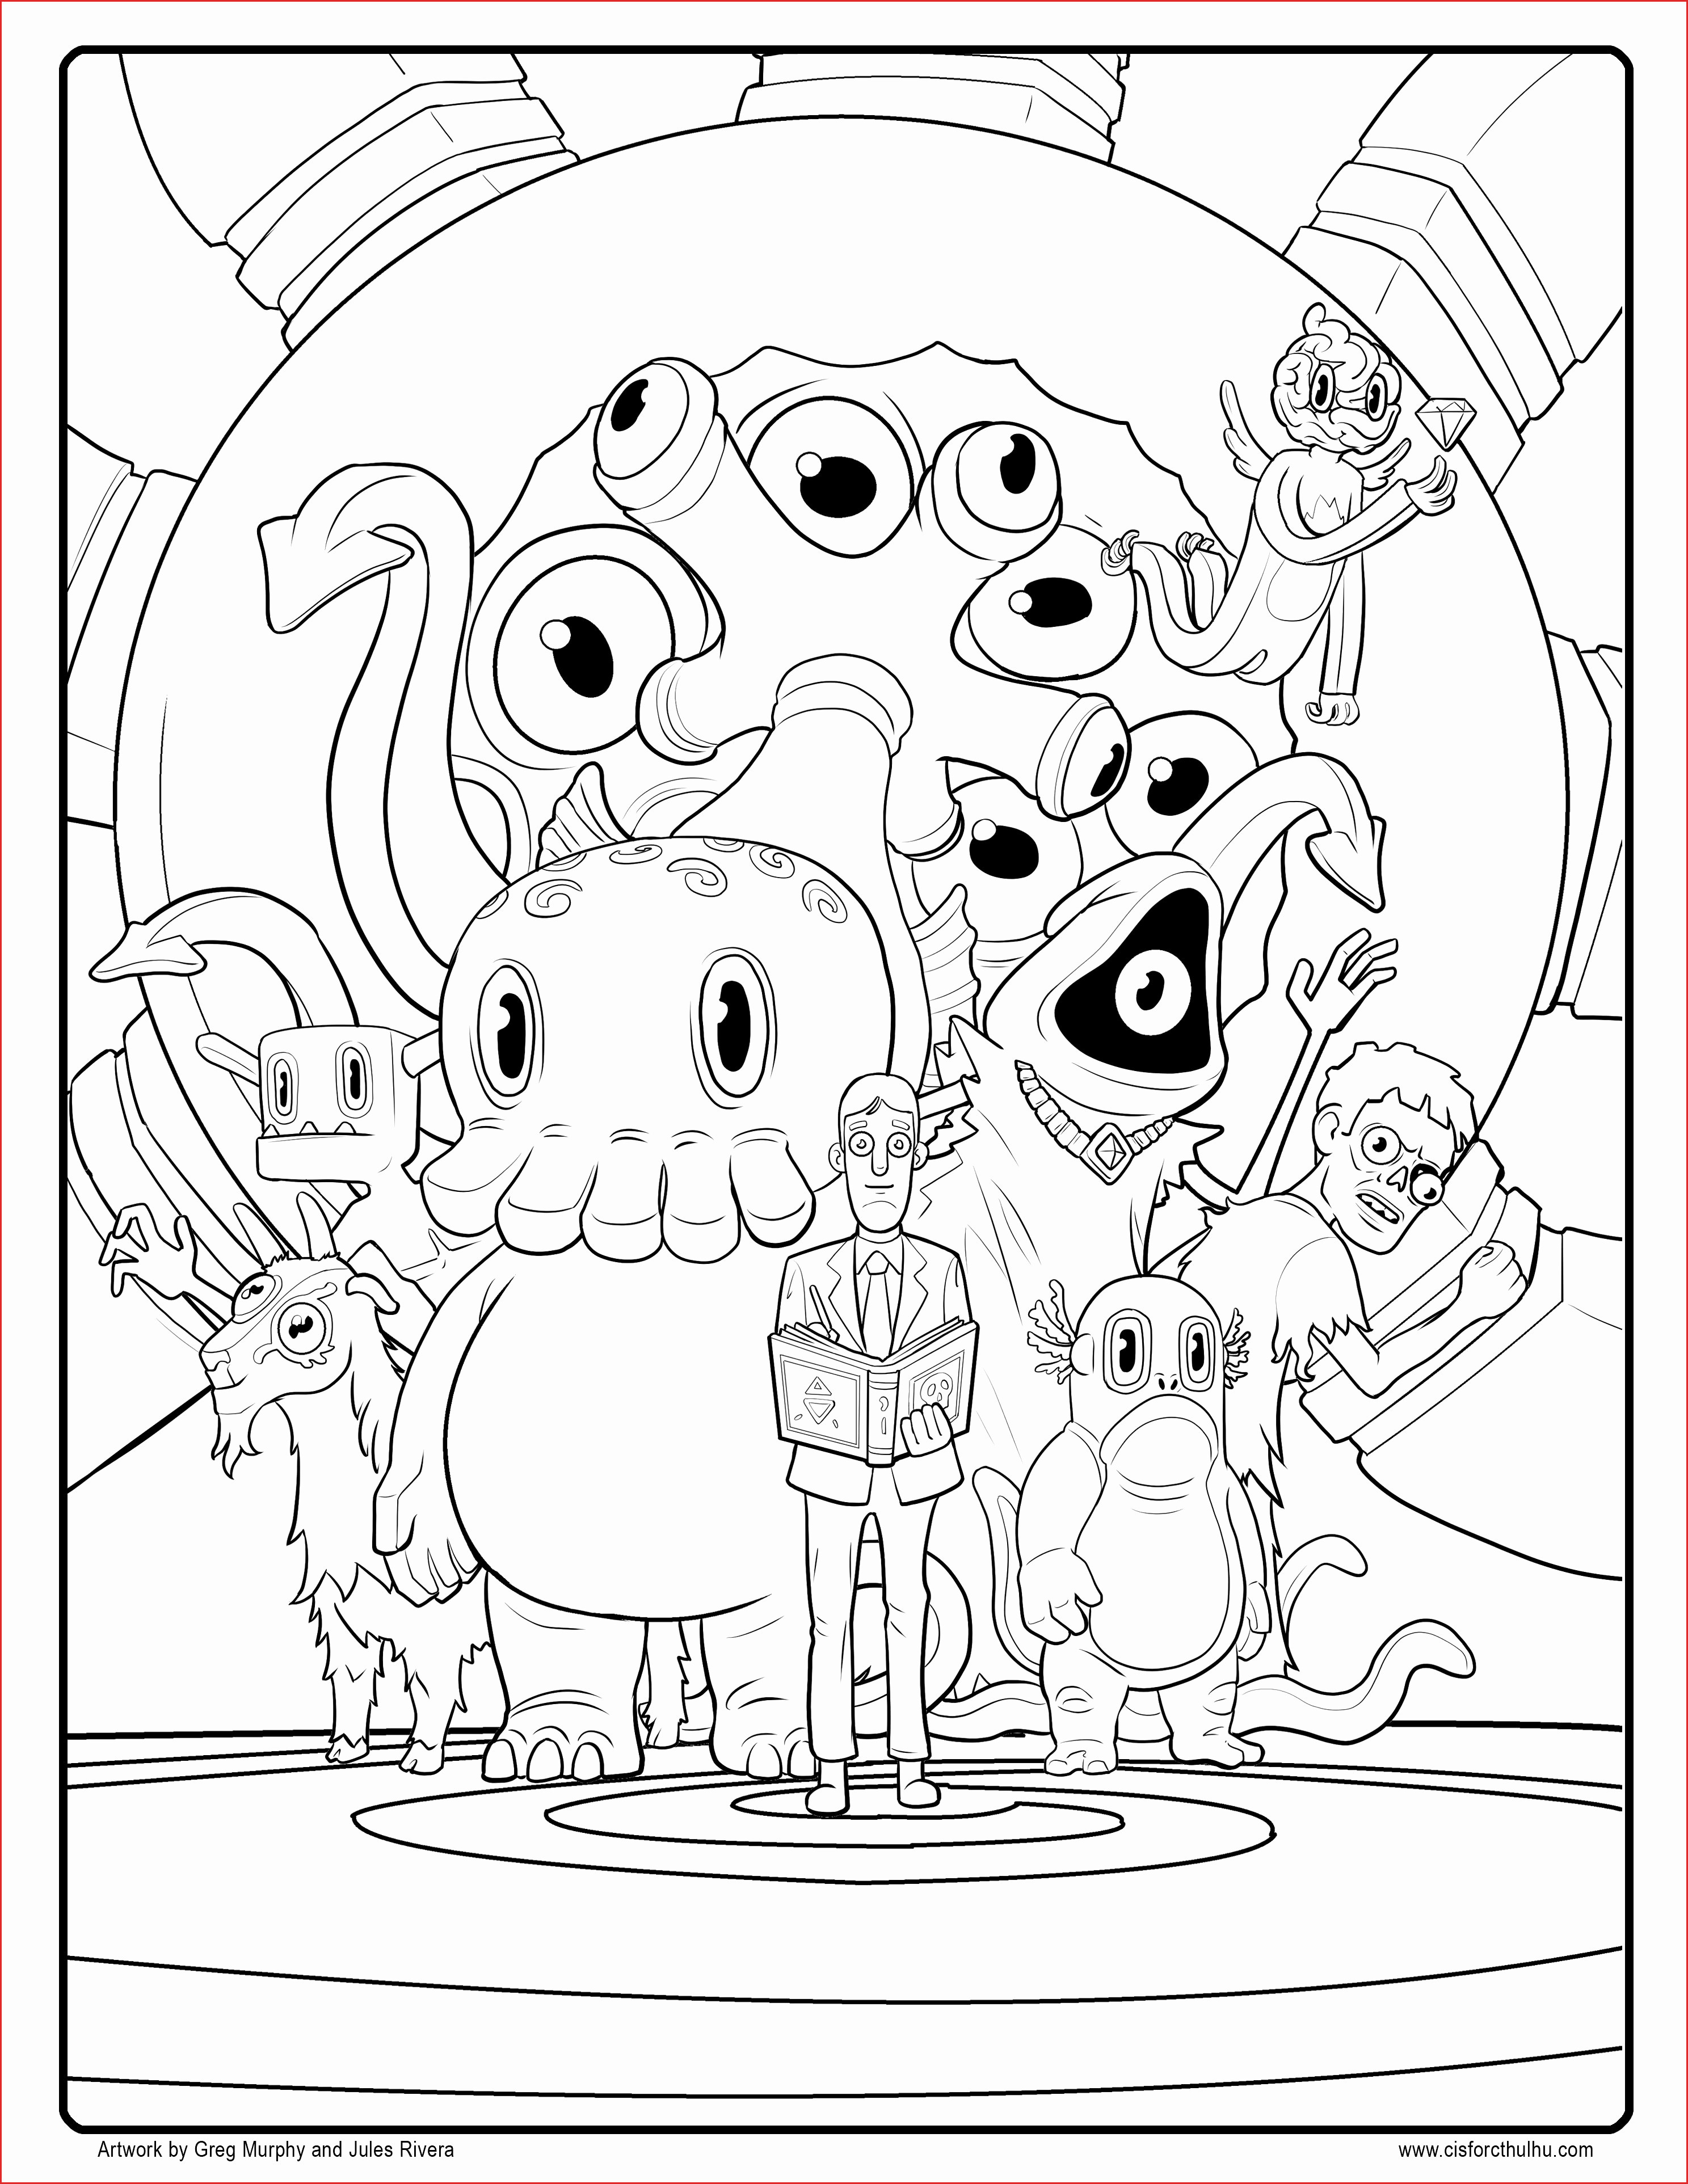 Story Coloring Pages Bible Story Coloring Pages 18823 Bible Coloring Pages Coloring Pages